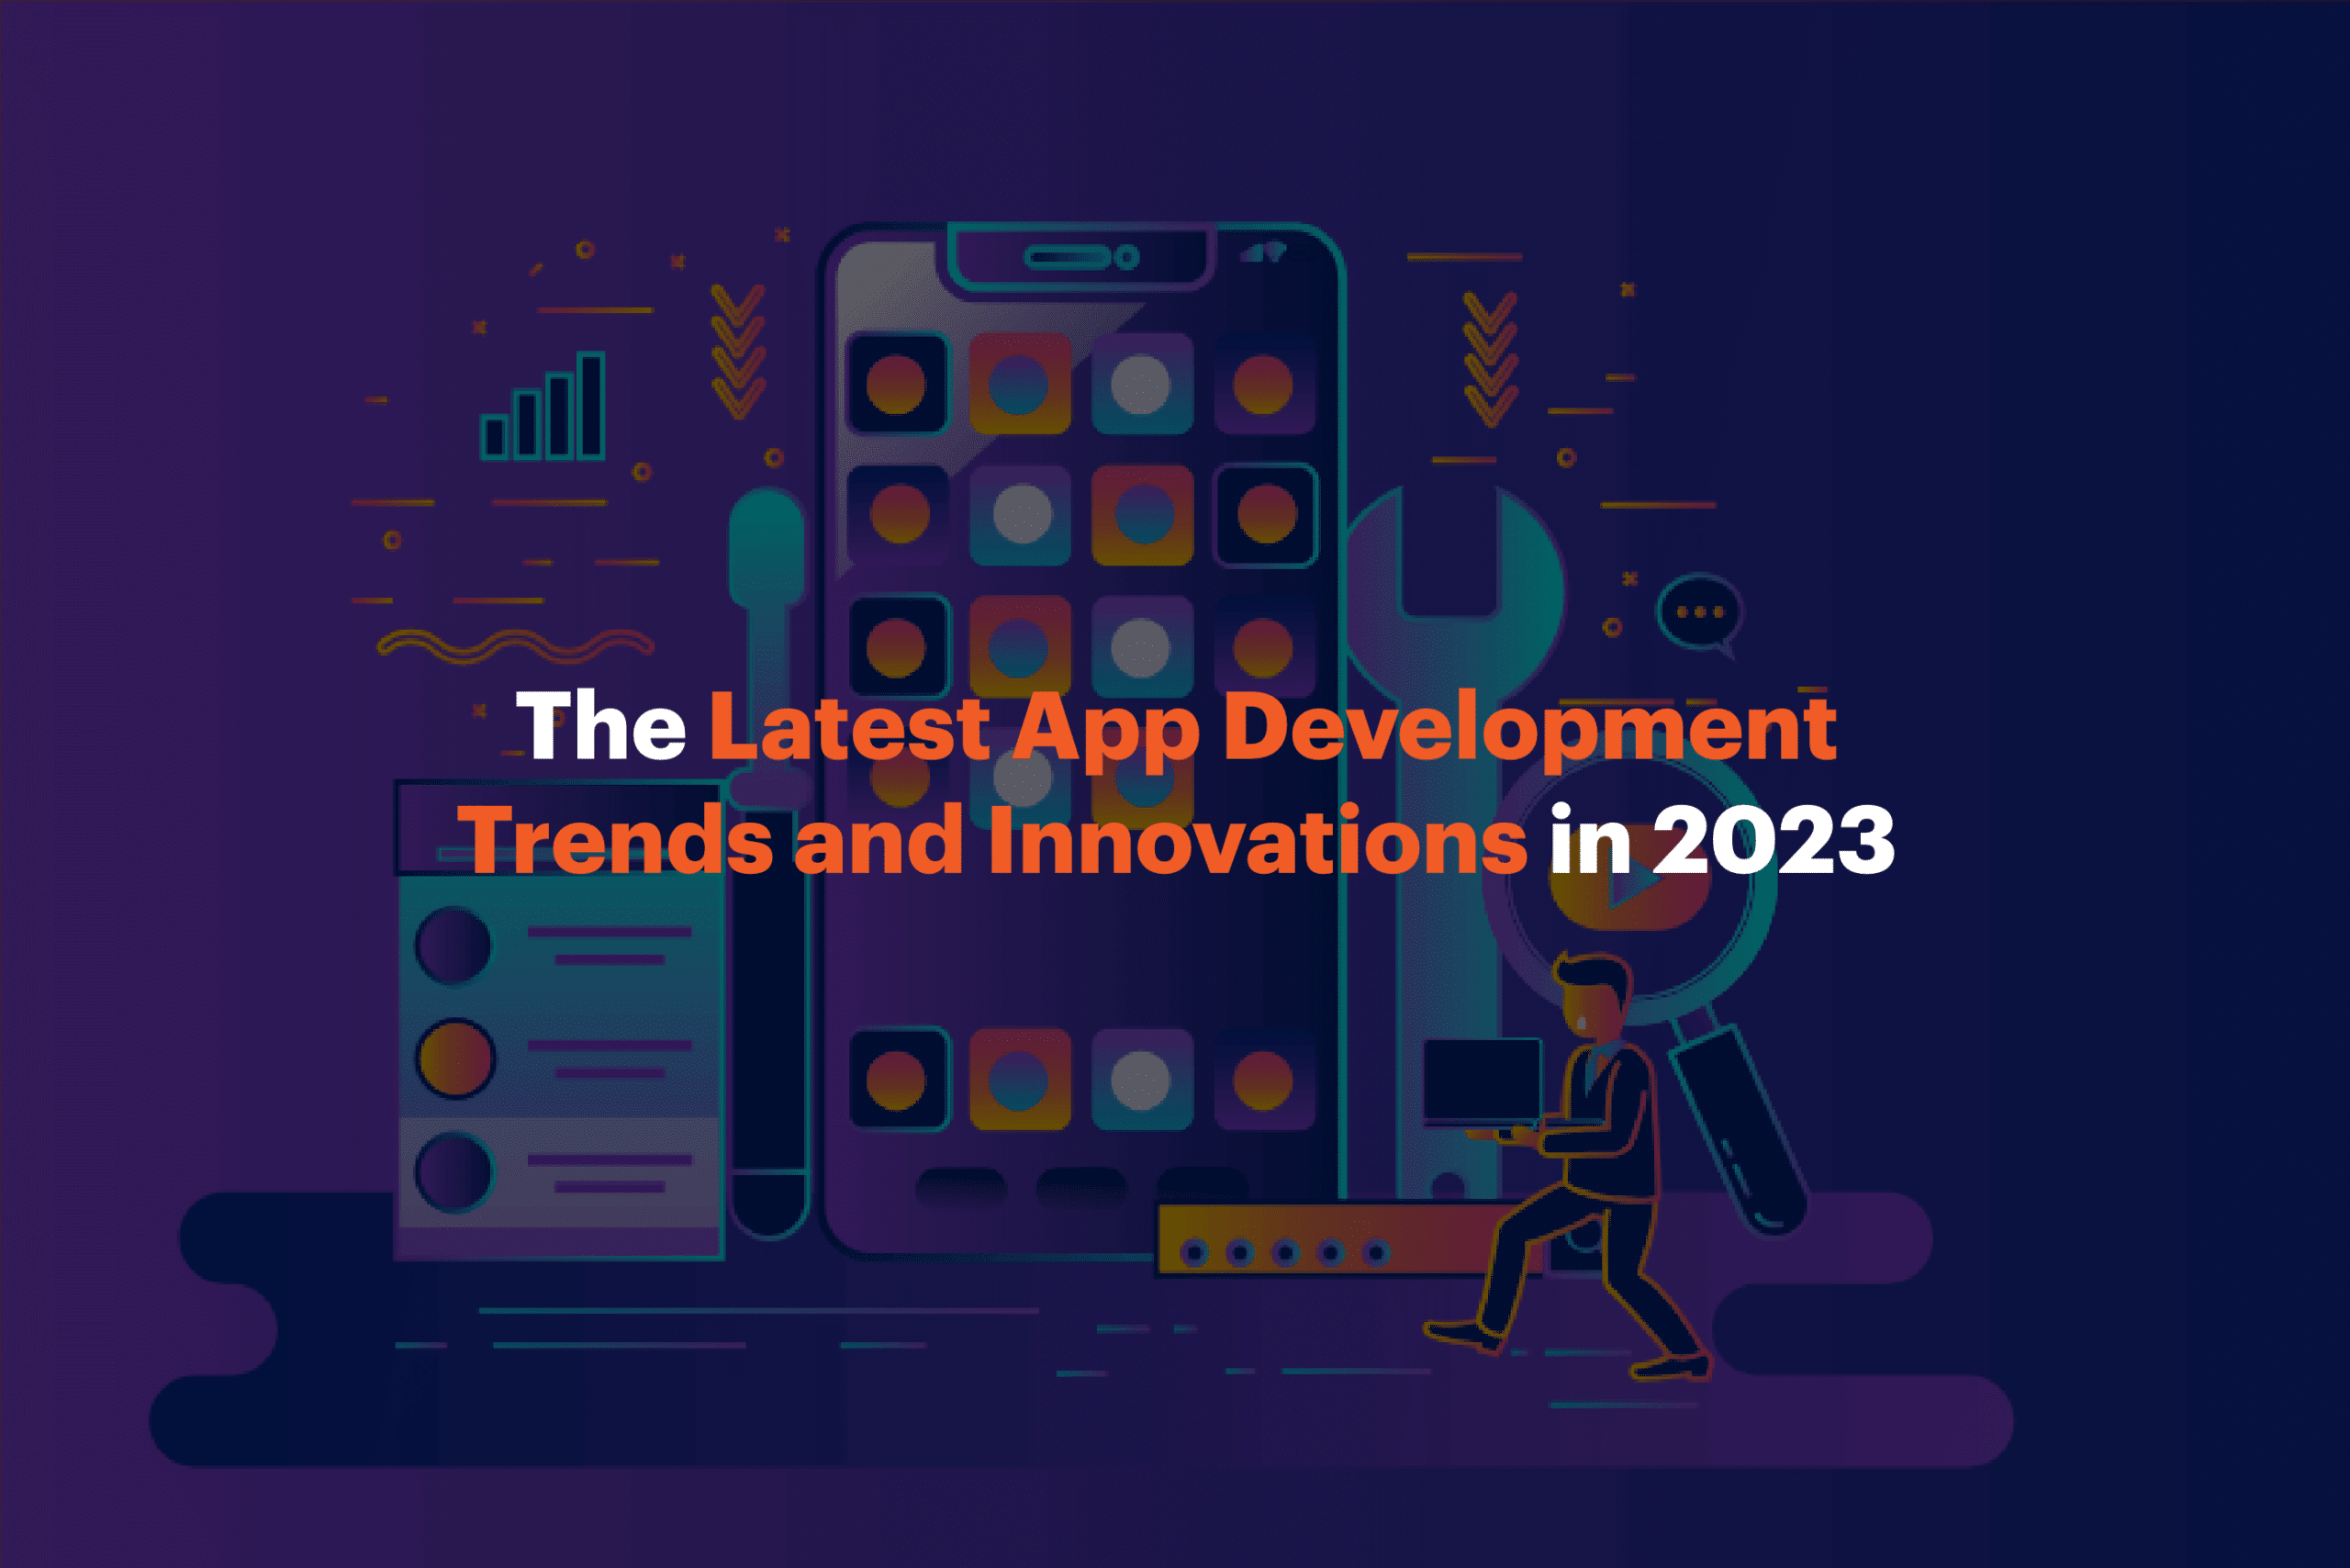 The Latest App Development Trends and Innovations in 2023